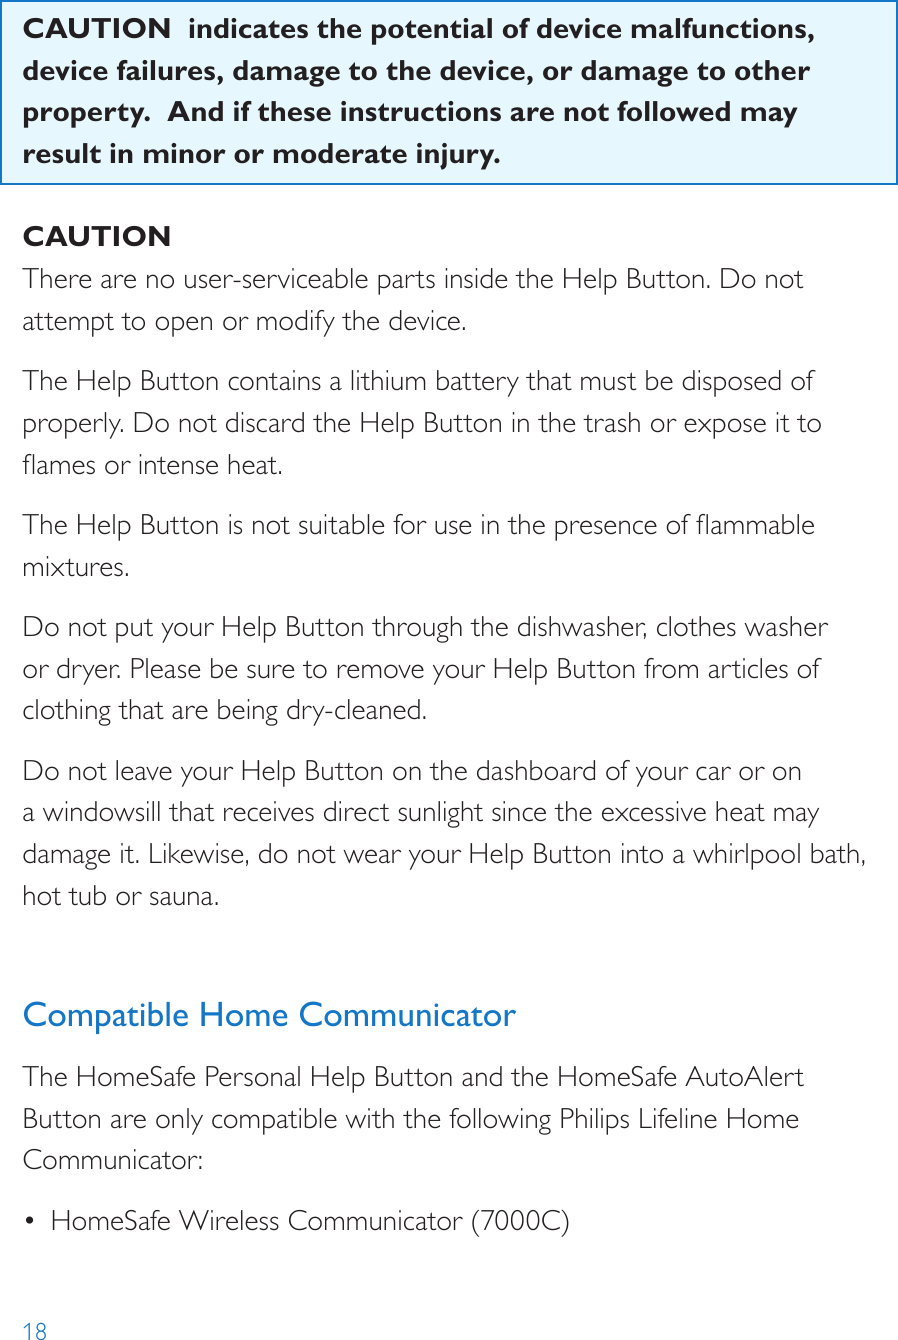 18CAUTION  indicates the potential of device malfunctions, device failures, damage to the device, or damage to other property.  And if these instructions are not followed may result in minor or moderate injury. CAUTIONThere are no user-serviceable parts inside the Help Button. Do not attempt to open or modify the device.The Help Button contains a lithium battery that must be disposed of properly. Do not discard the Help Button in the trash or expose it to ames or intense heat. The Help Button is not suitable for use in the presence of ammable mixtures.Do not put your Help Button through the dishwasher, clothes washer or dryer. Please be sure to remove your Help Button from articles of clothing that are being dry-cleaned.Do not leave your Help Button on the dashboard of your car or on a windowsill that receives direct sunlight since the excessive heat may damage it. Likewise, do not wear your Help Button into a whirlpool bath, hot tub or sauna. Compatible Home CommunicatorThe HomeSafe Personal Help Button and the HomeSafe AutoAlert Button are only compatible with the following Philips Lifeline Home Communicator:•  HomeSafe Wireless Communicator (7000C)